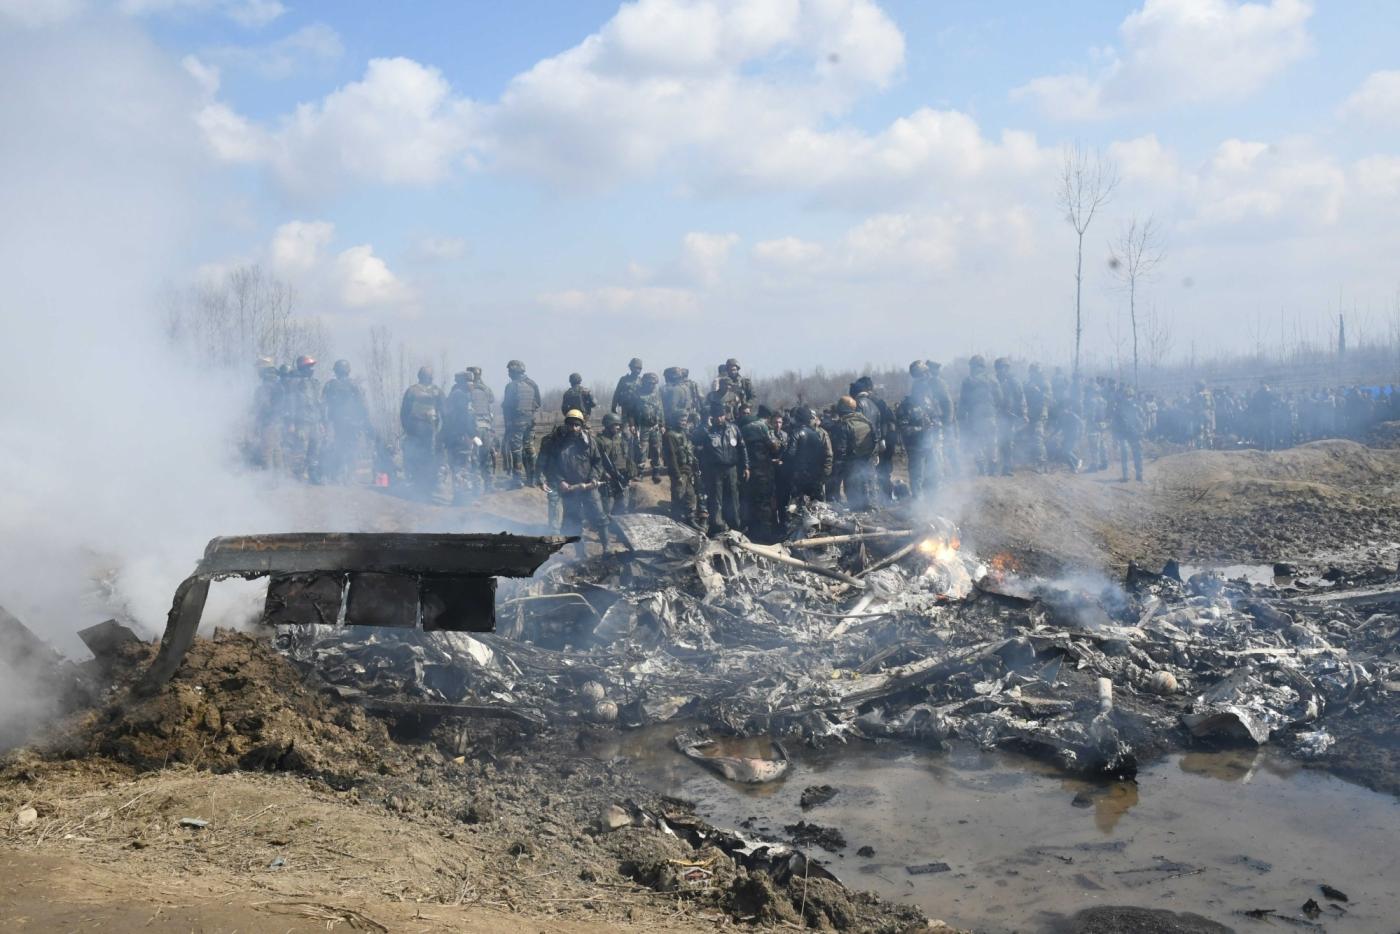 Budgam: Debris of an IAF aircraft that crashed in Budgam district of Jammu and Kashmir on Feb 27, 2019. (Photo: IANS) by .